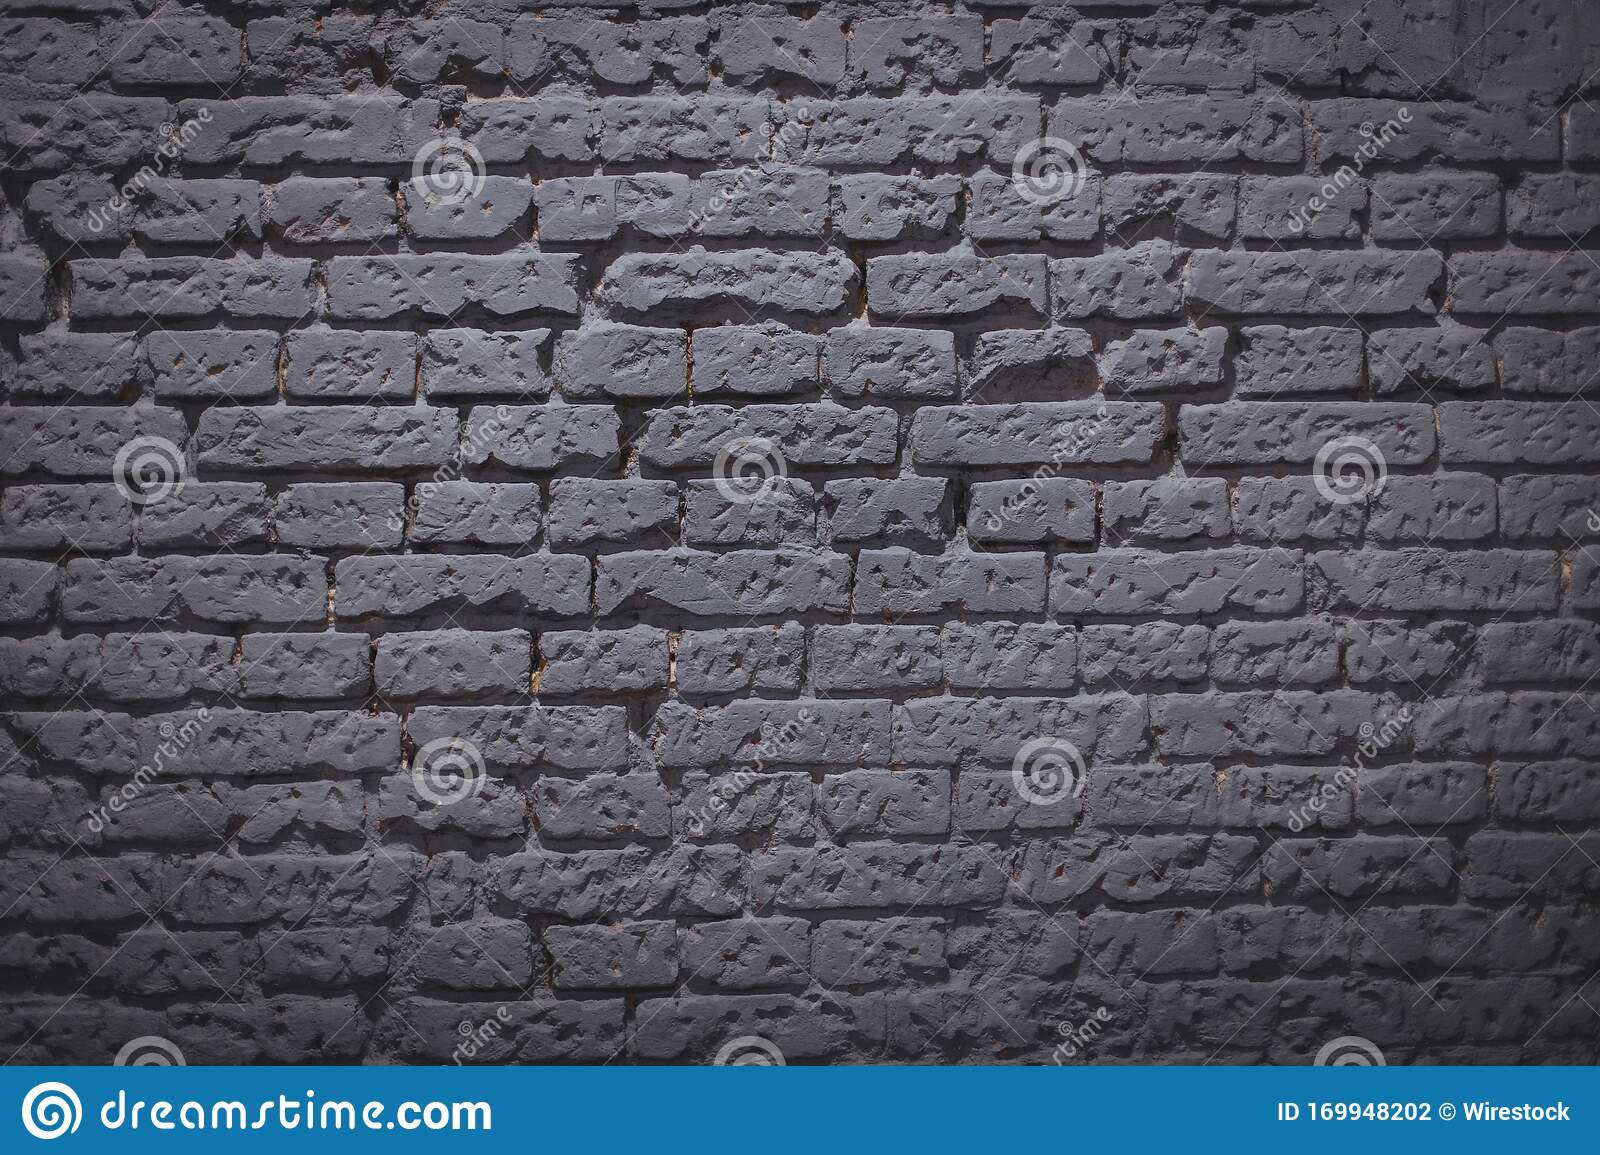 Background of a grey brick wall